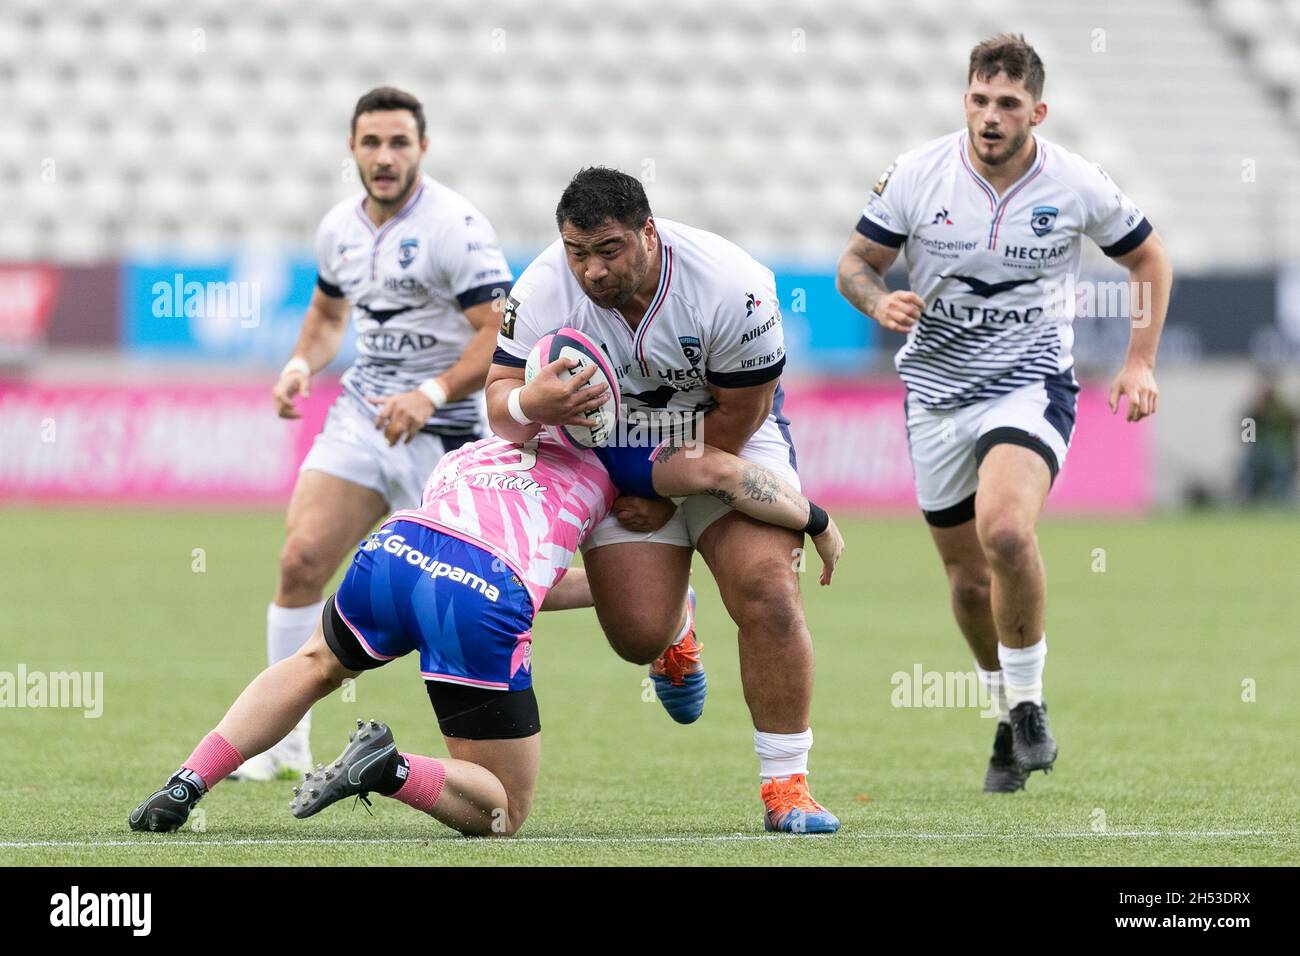 PARIS, FRA. NOV 6TH Titi Lamoisitele of Montpellier Herault in action during the Top 14 match between Stade Français Paris Rugby and Montpellier Hérault Rugby at Stade Jean-Bouin, Paris on Saturday 6th November 2021. (Credit: Juan Gasparini | MI News) Credit: MI News & Sport /Alamy Live News Stock Photo